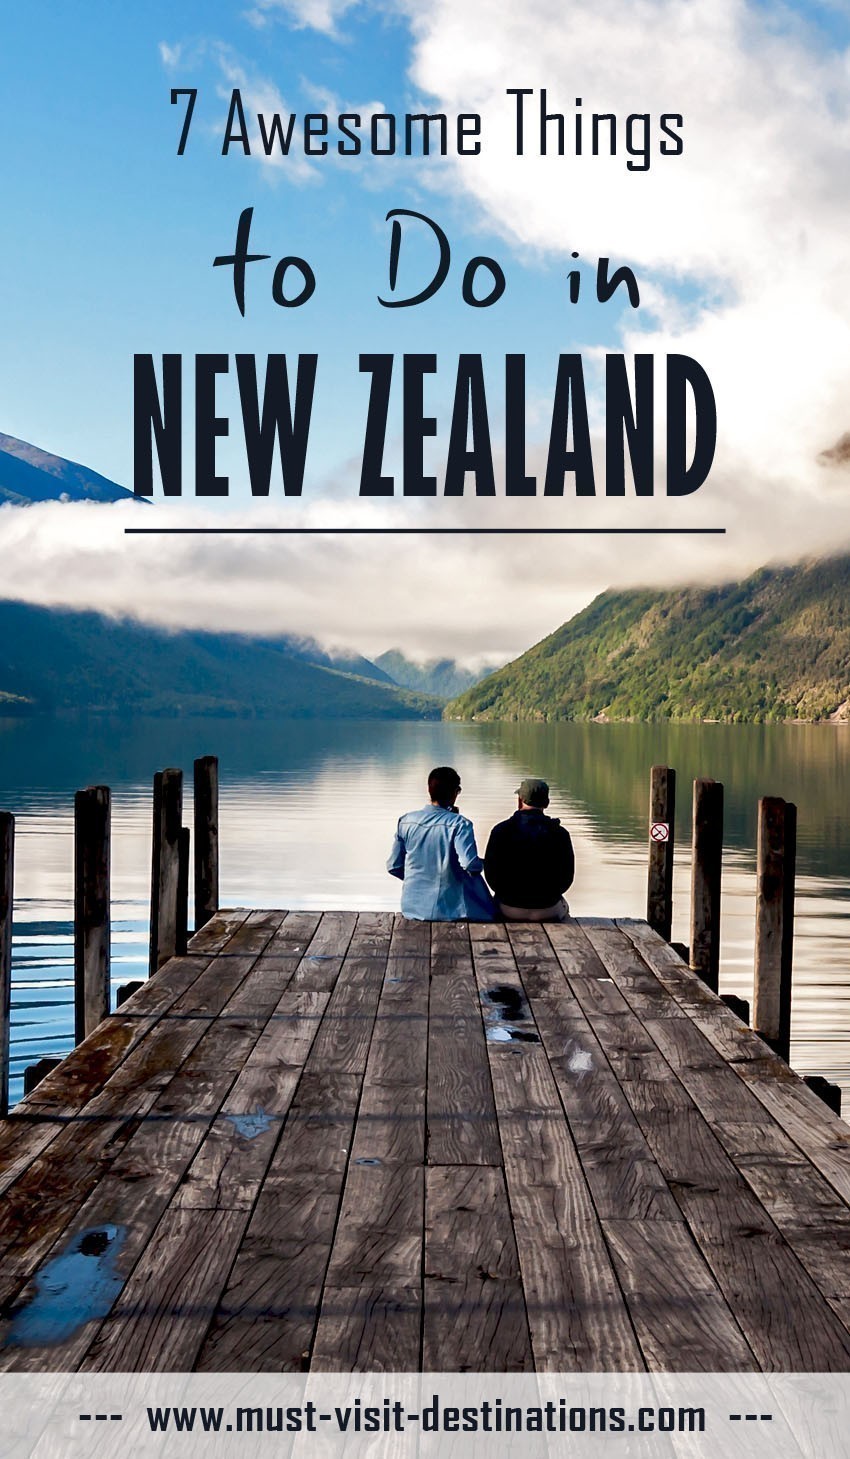 7 Awesome Things to Do in New Zealand #travel #newzealand